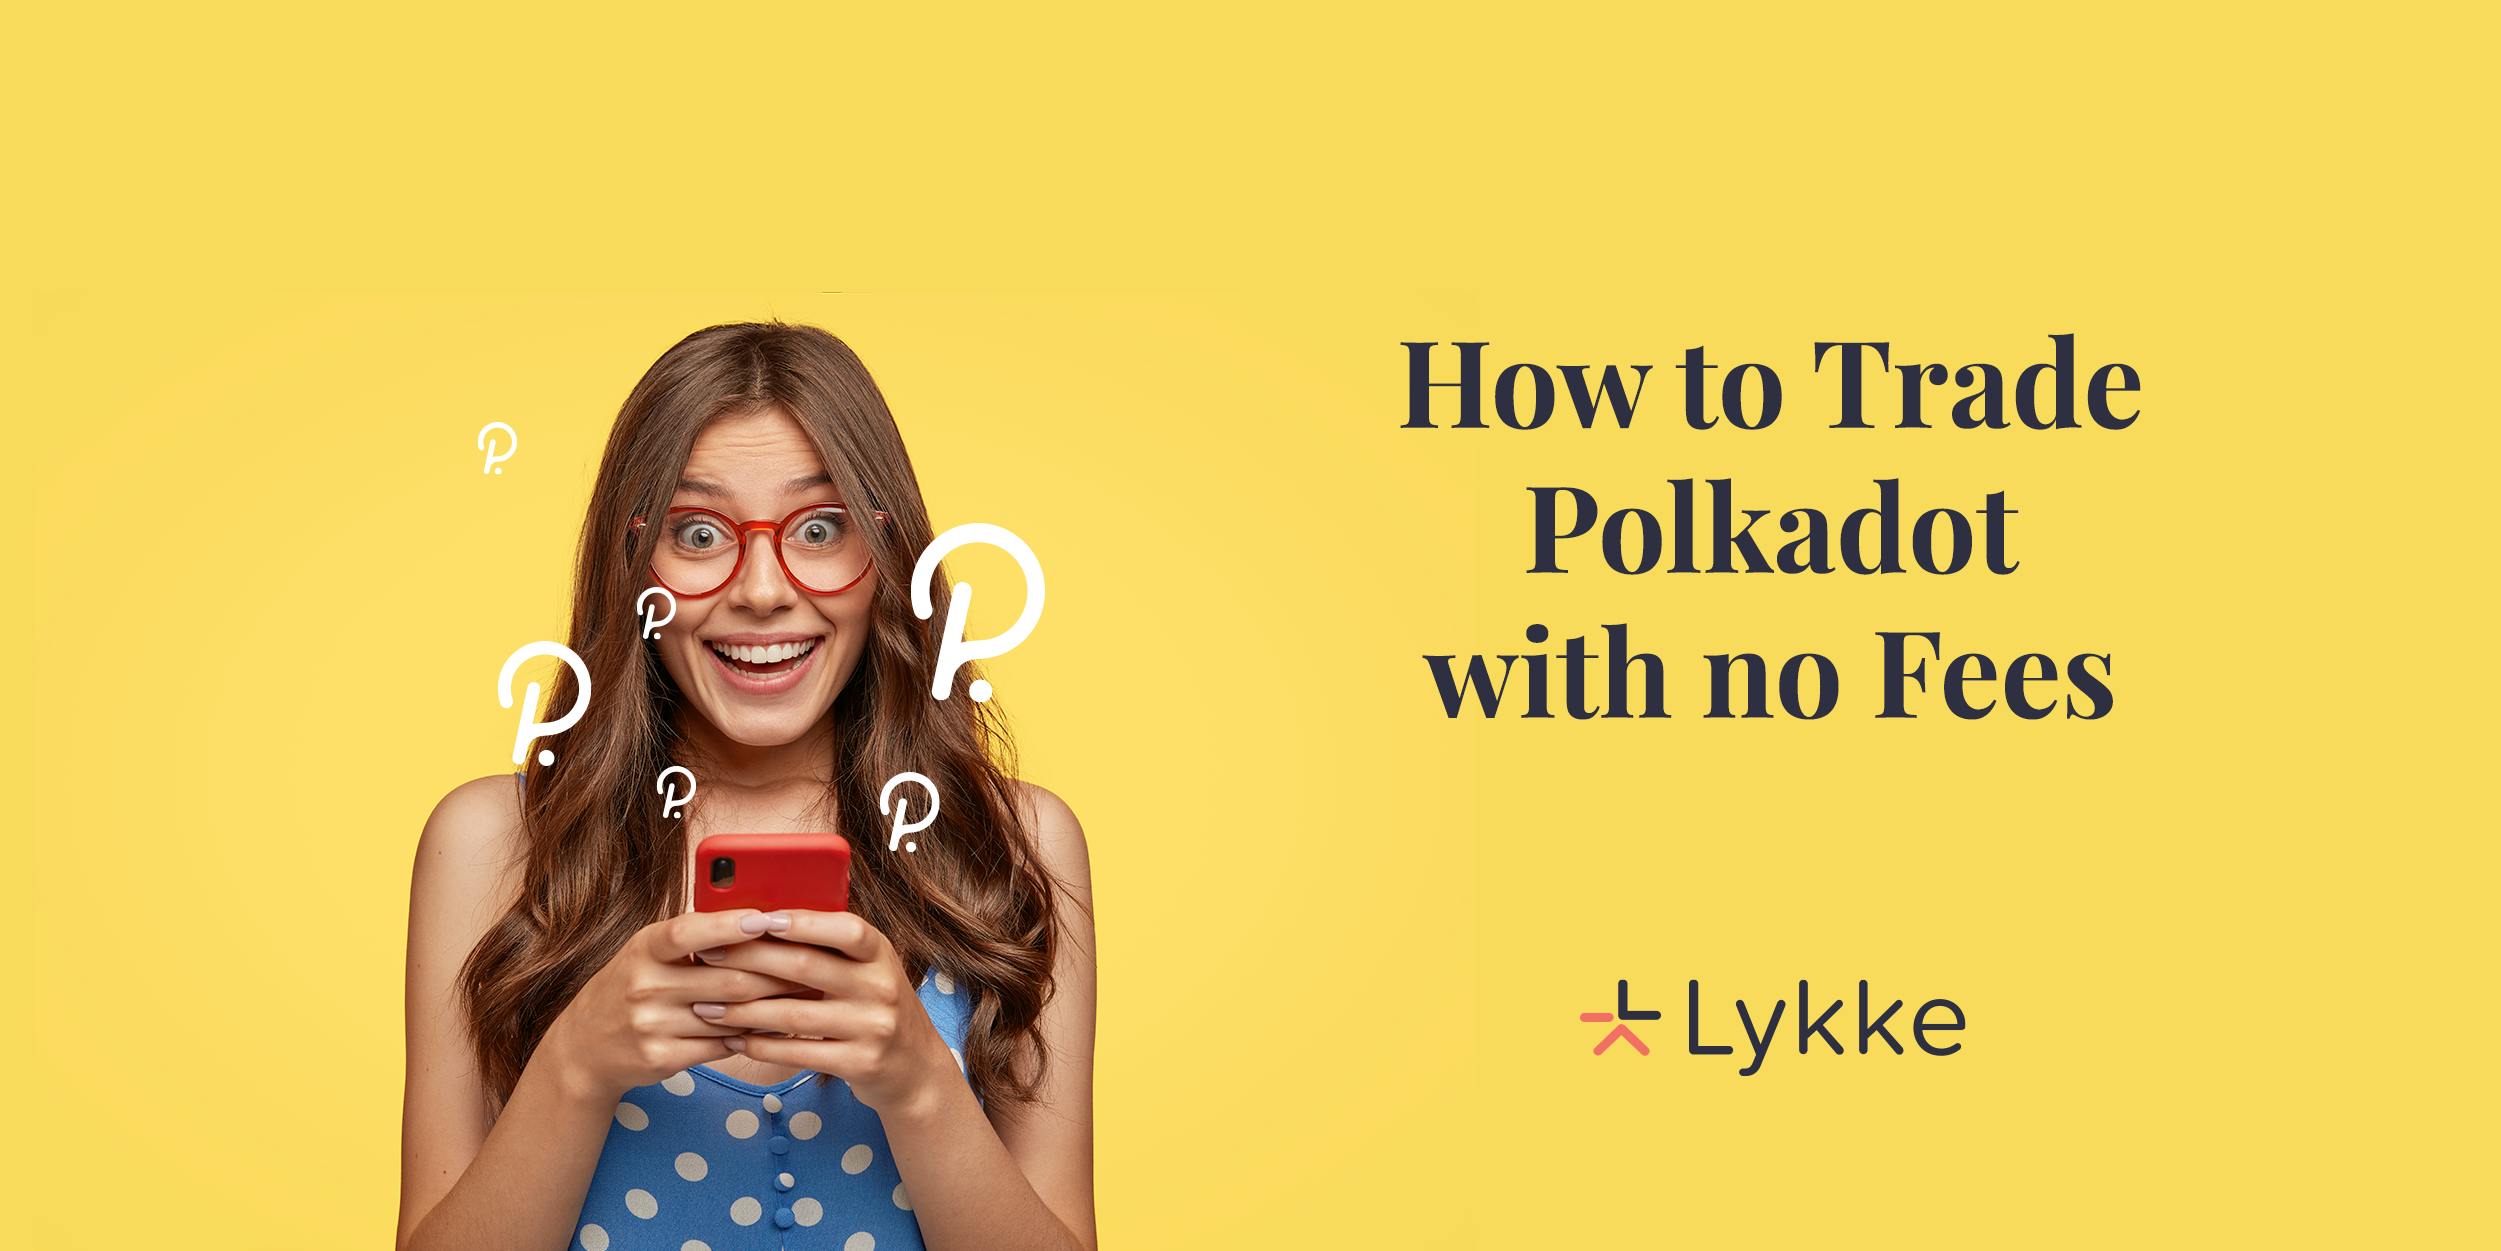 How to Buy Polkadot (Dot) Without Fees